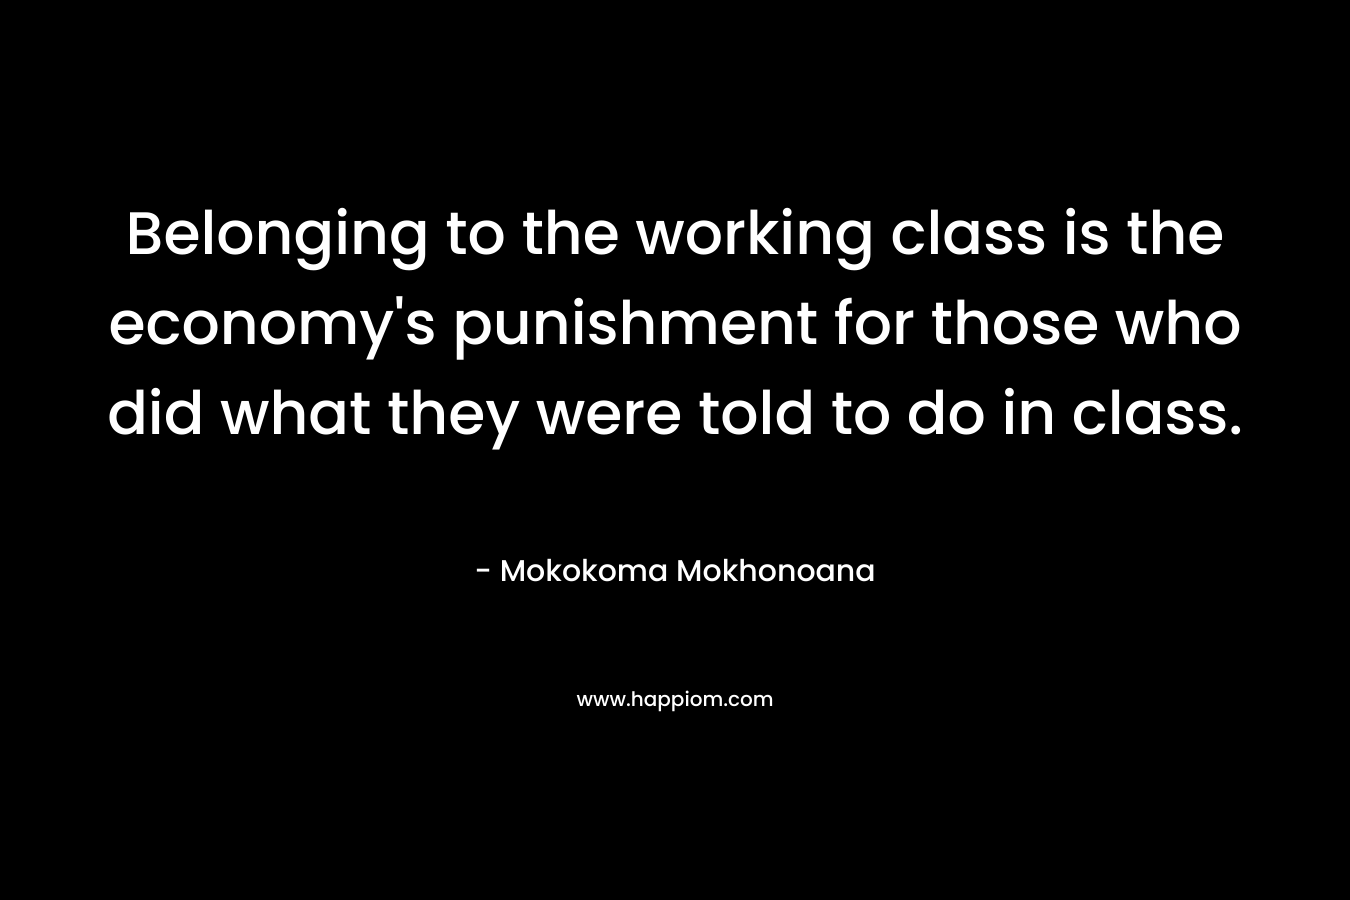 Belonging to the working class is the economy's punishment for those who did what they were told to do in class.